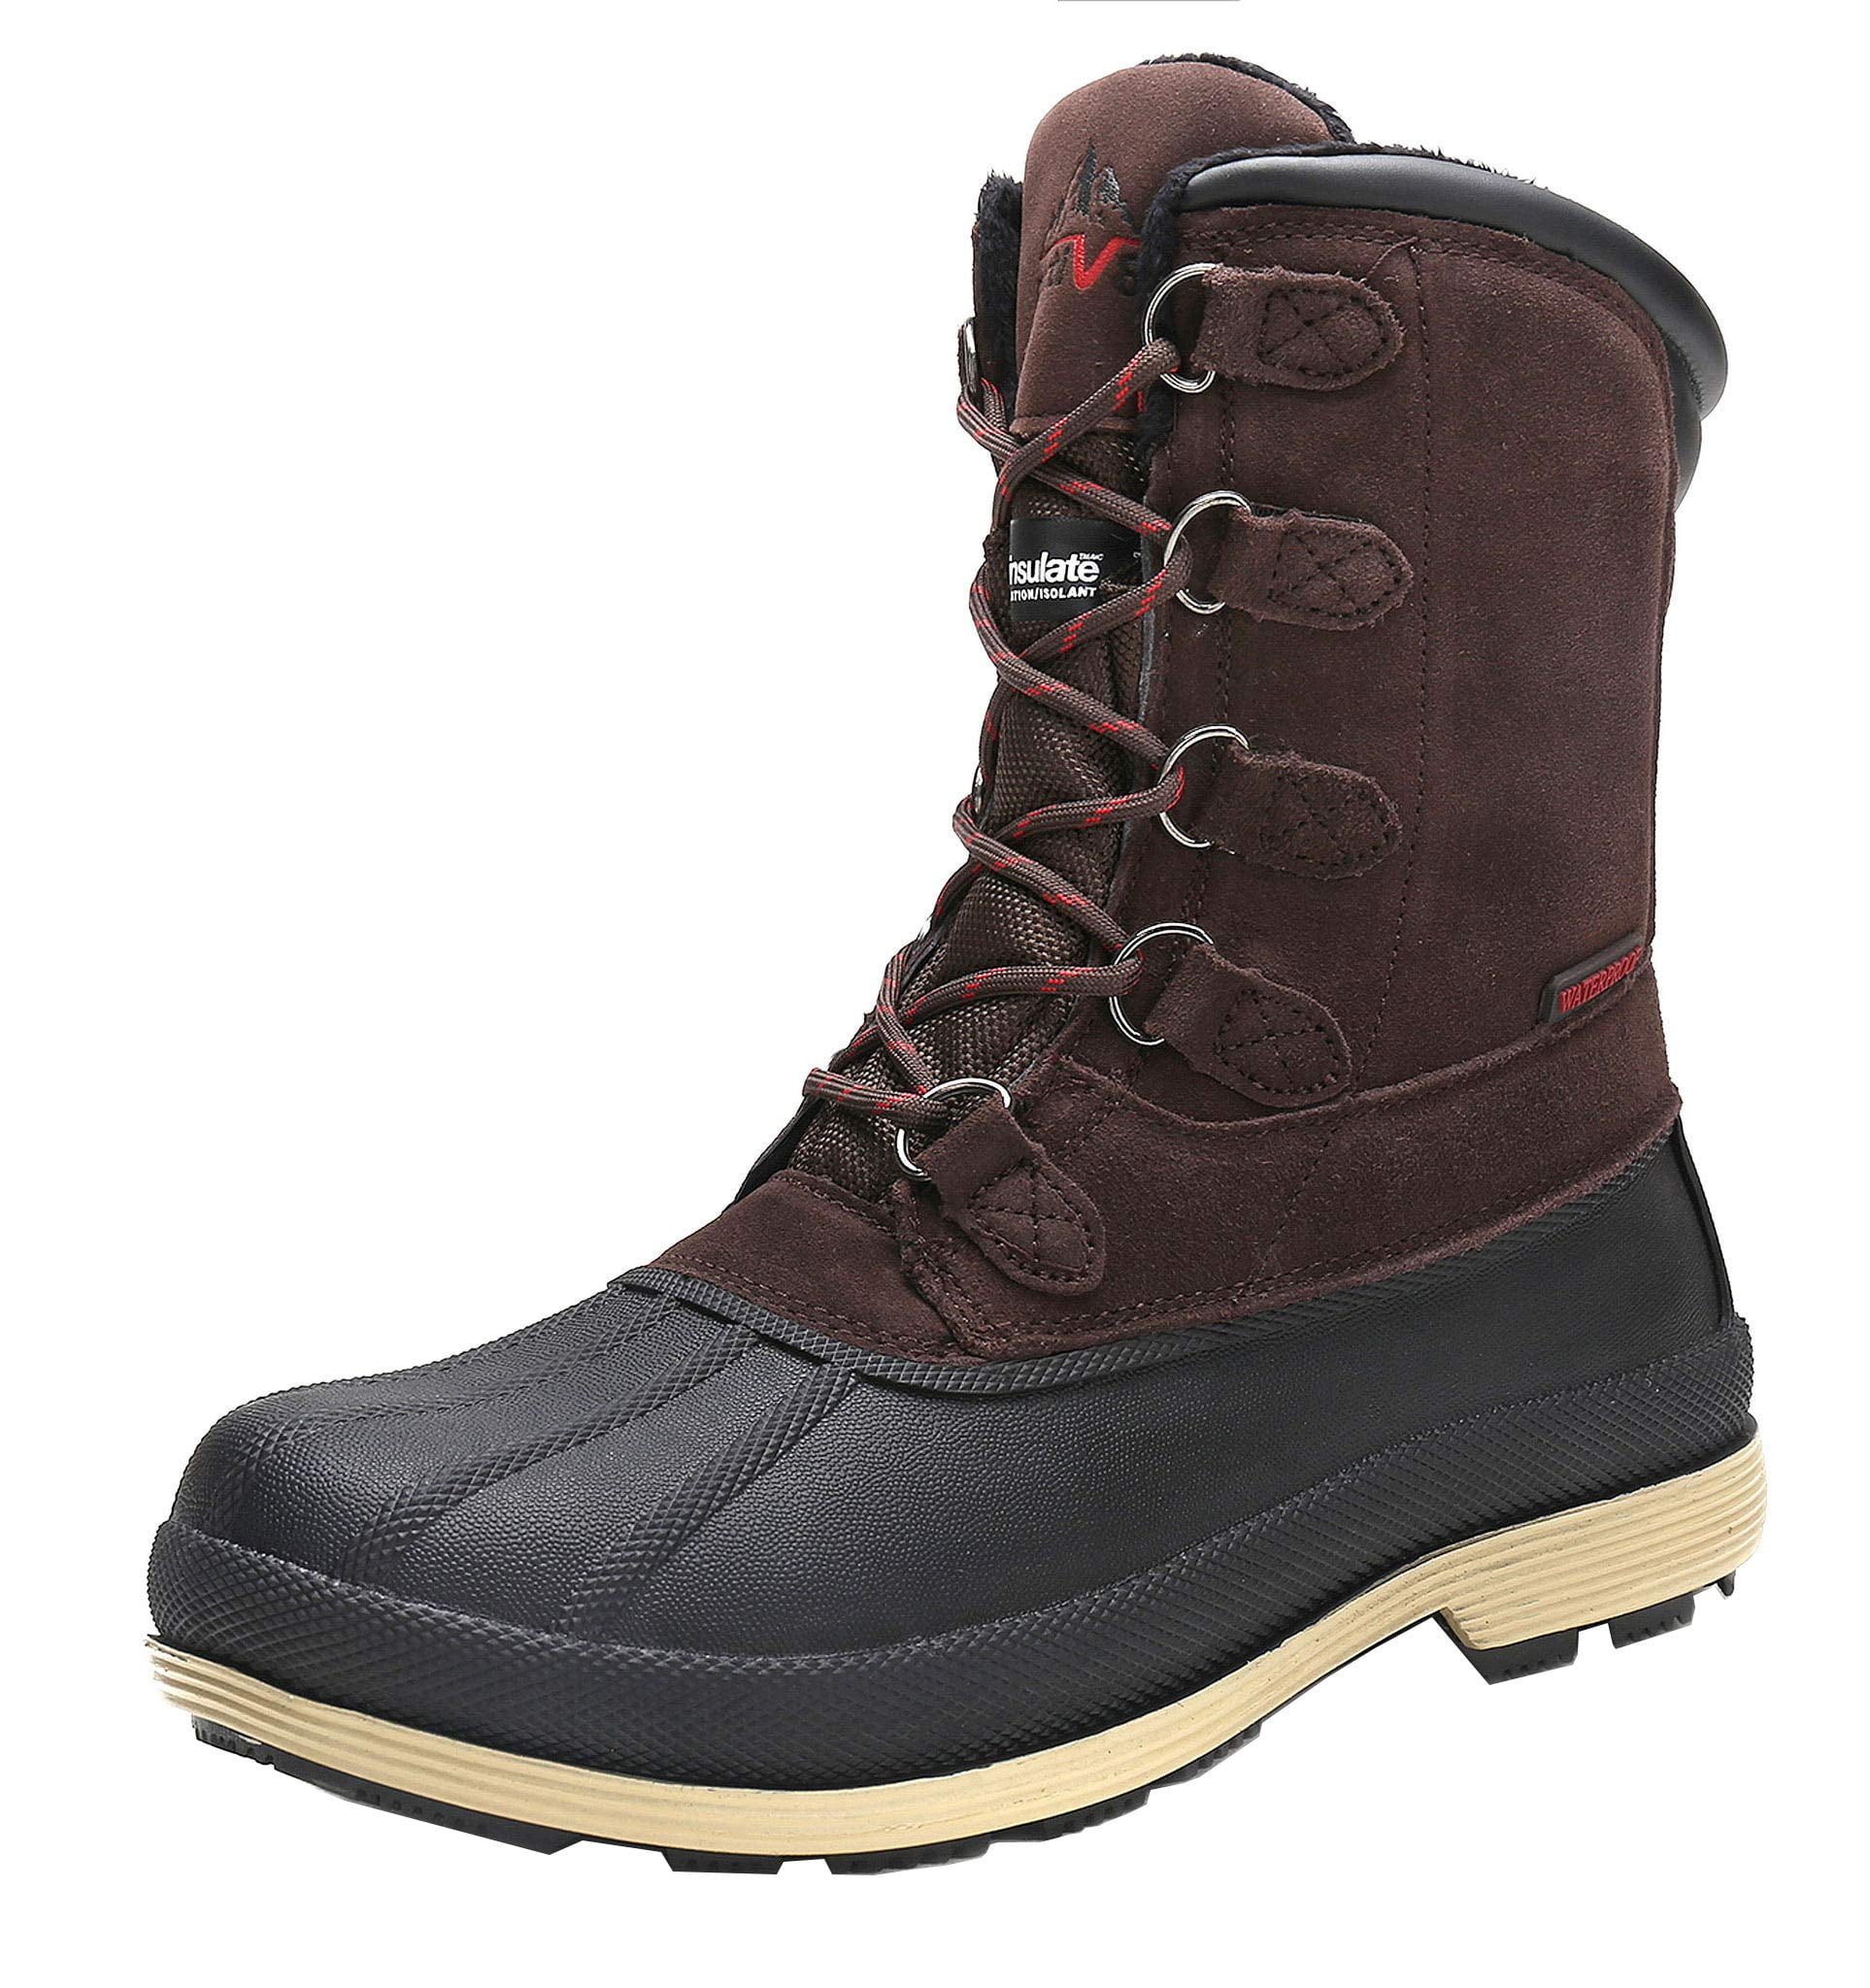 NORTIV 8 Womens Insulated Warm Snow Winter Boots 